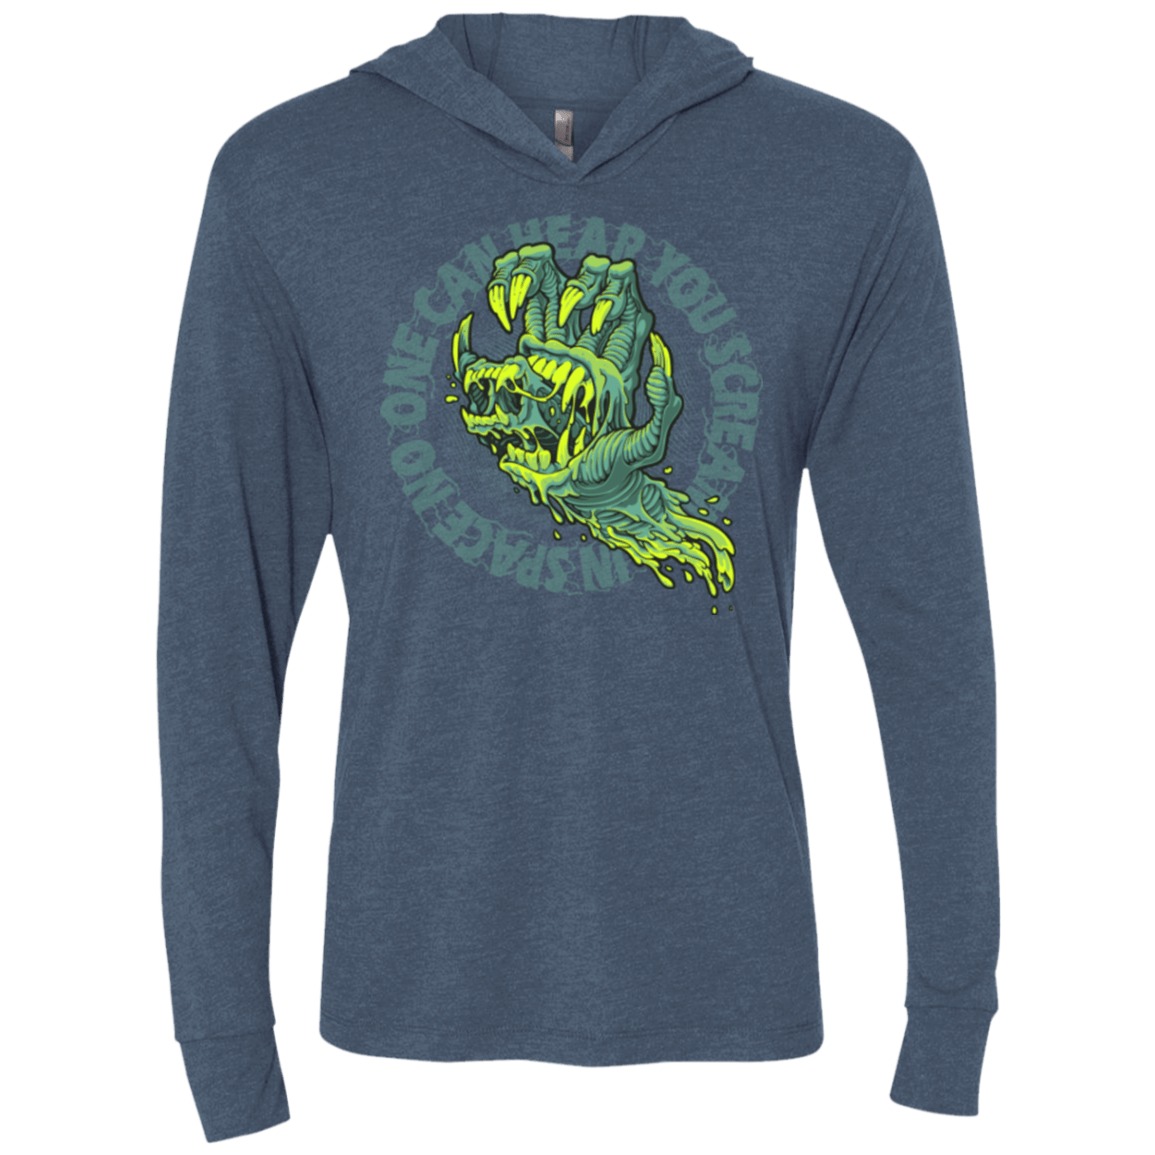 T-Shirts Indigo / X-Small The Hand That Feeds Triblend Long Sleeve Hoodie Tee